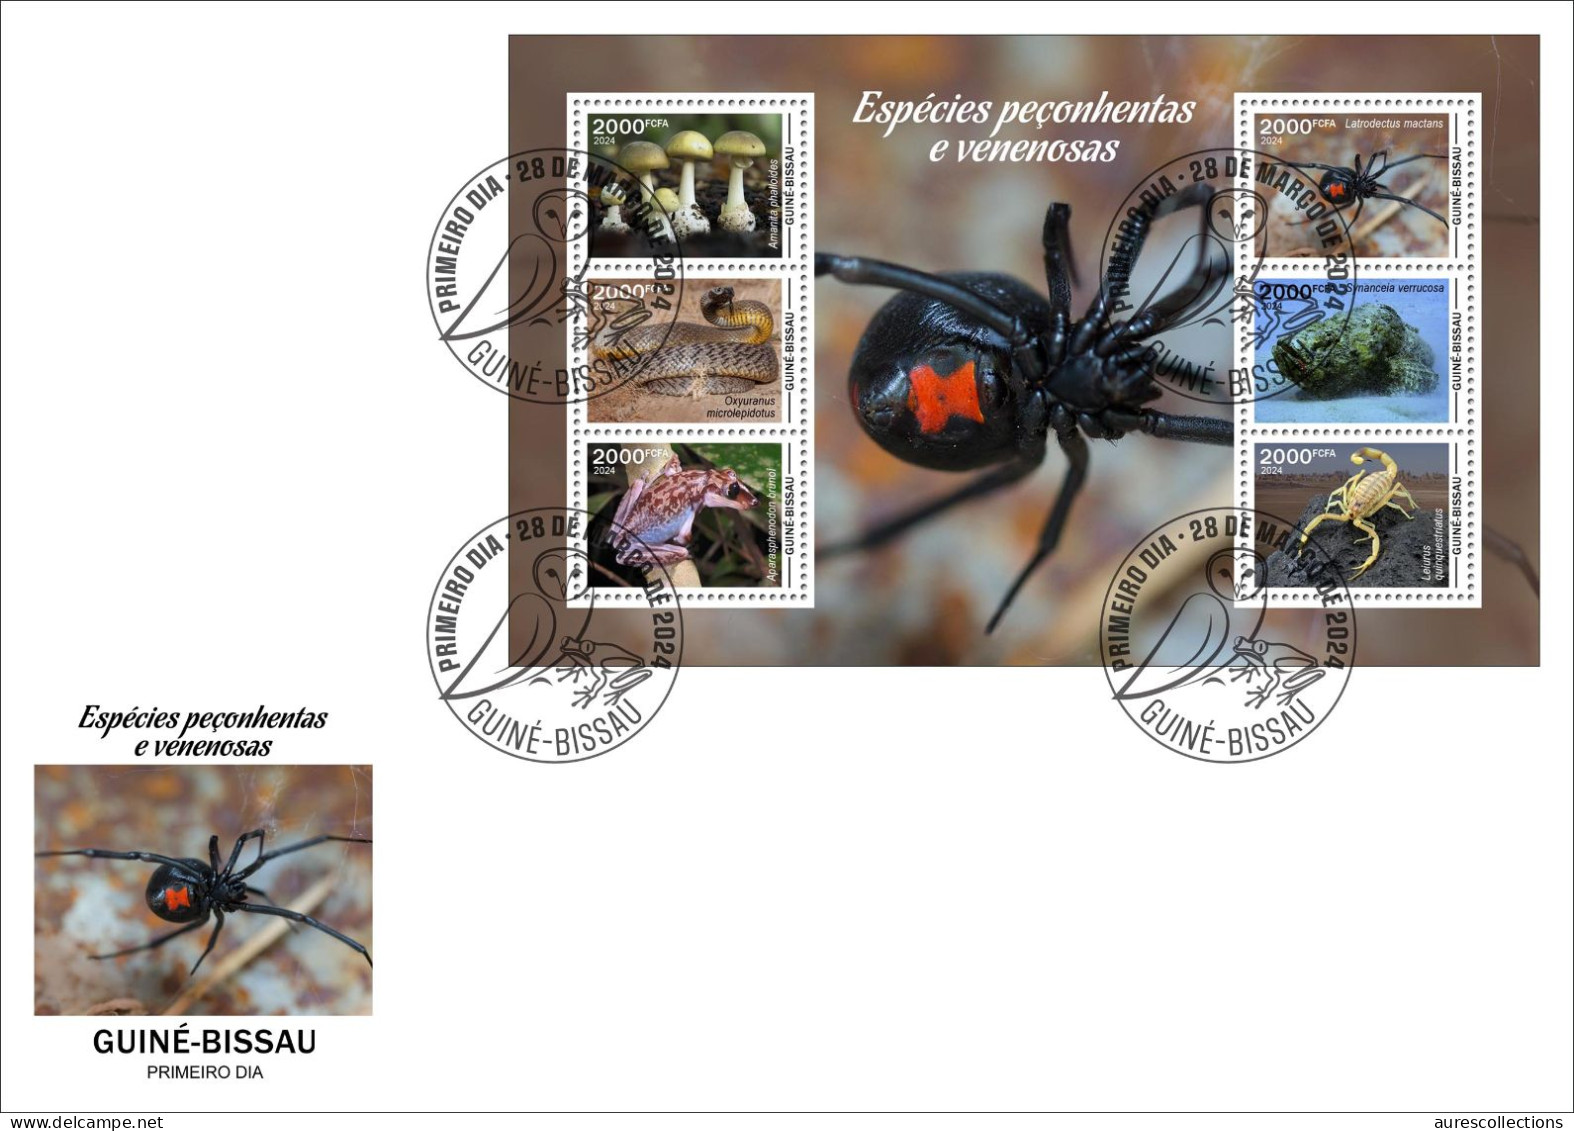 GUINEA BISSAU 2024 FDC MS 6V - POISONOUS TOXIC VENOMOUS - FROG FROGS MUSHROOMS SNAKES FISH SCORPION SPIDERS - Rane